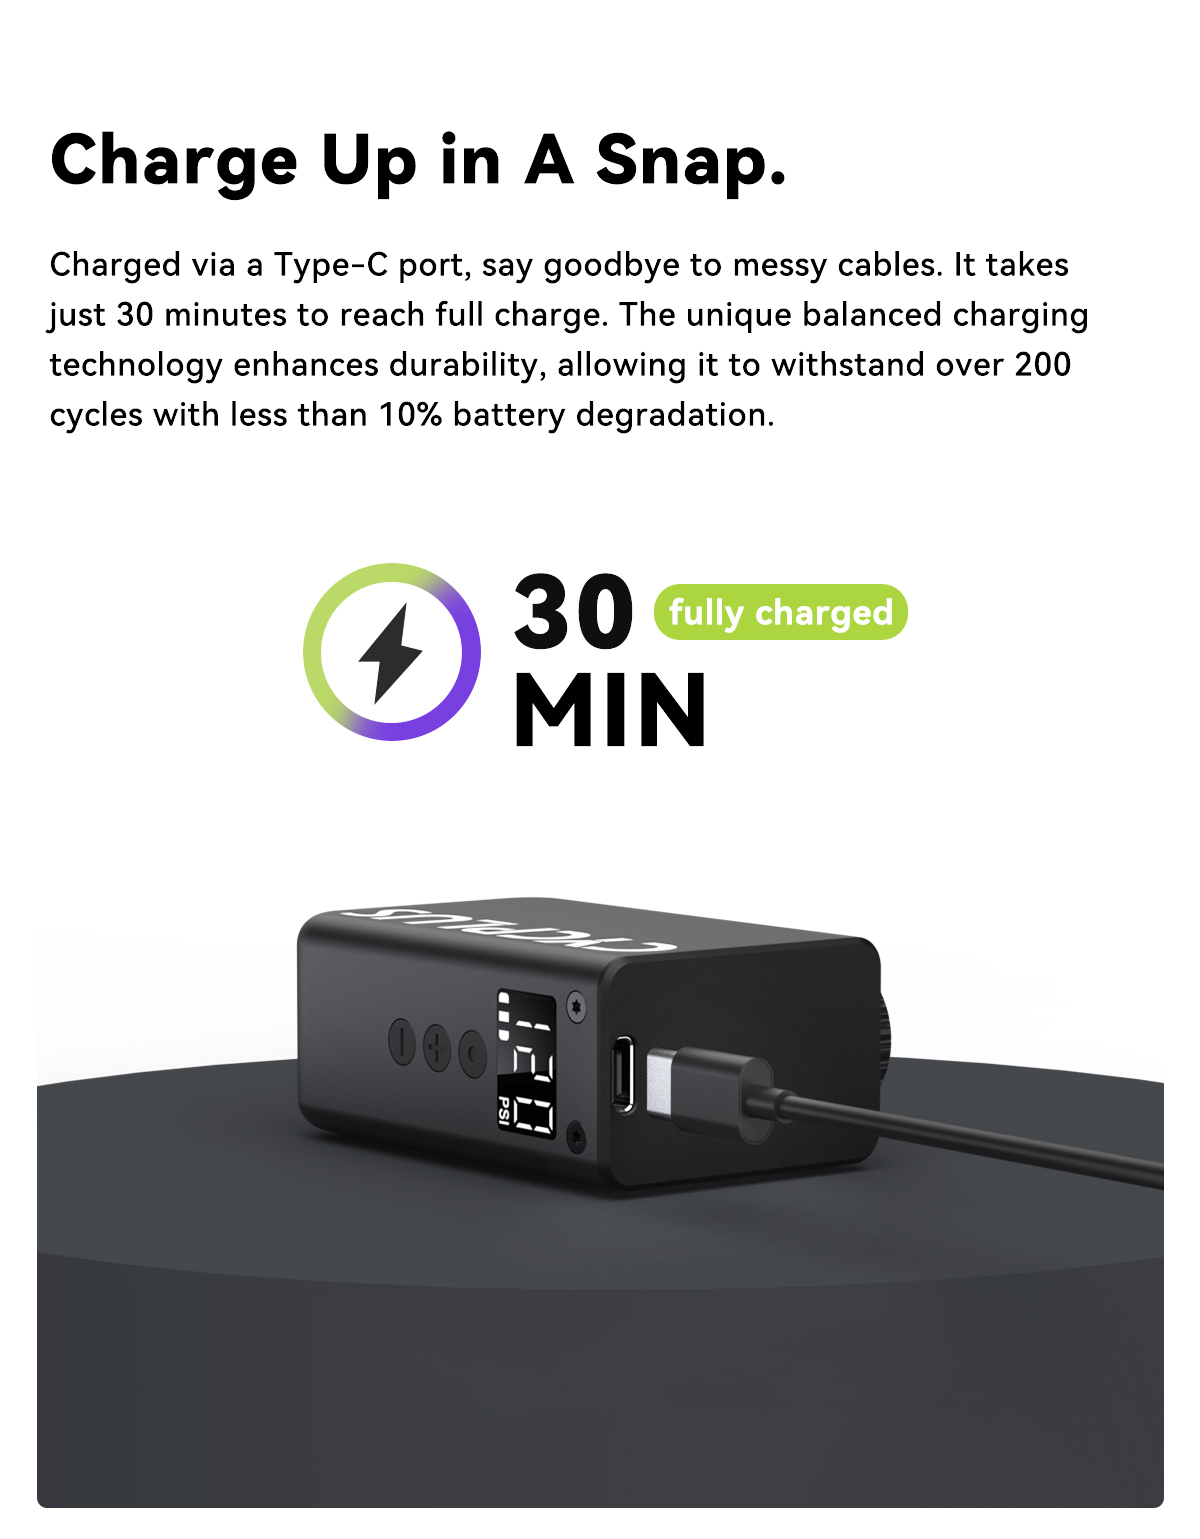 Charge Up in A Snap.  Charged via a Type-C port, say goodbye to messy cables. It takes just 30 minutes to reach full charge. The unique balanced charging technology enhances durability, allowing it to withstand over 200 cycles with less than 10% battery degradation.  *1 months on standby, and it's still over half-charged.